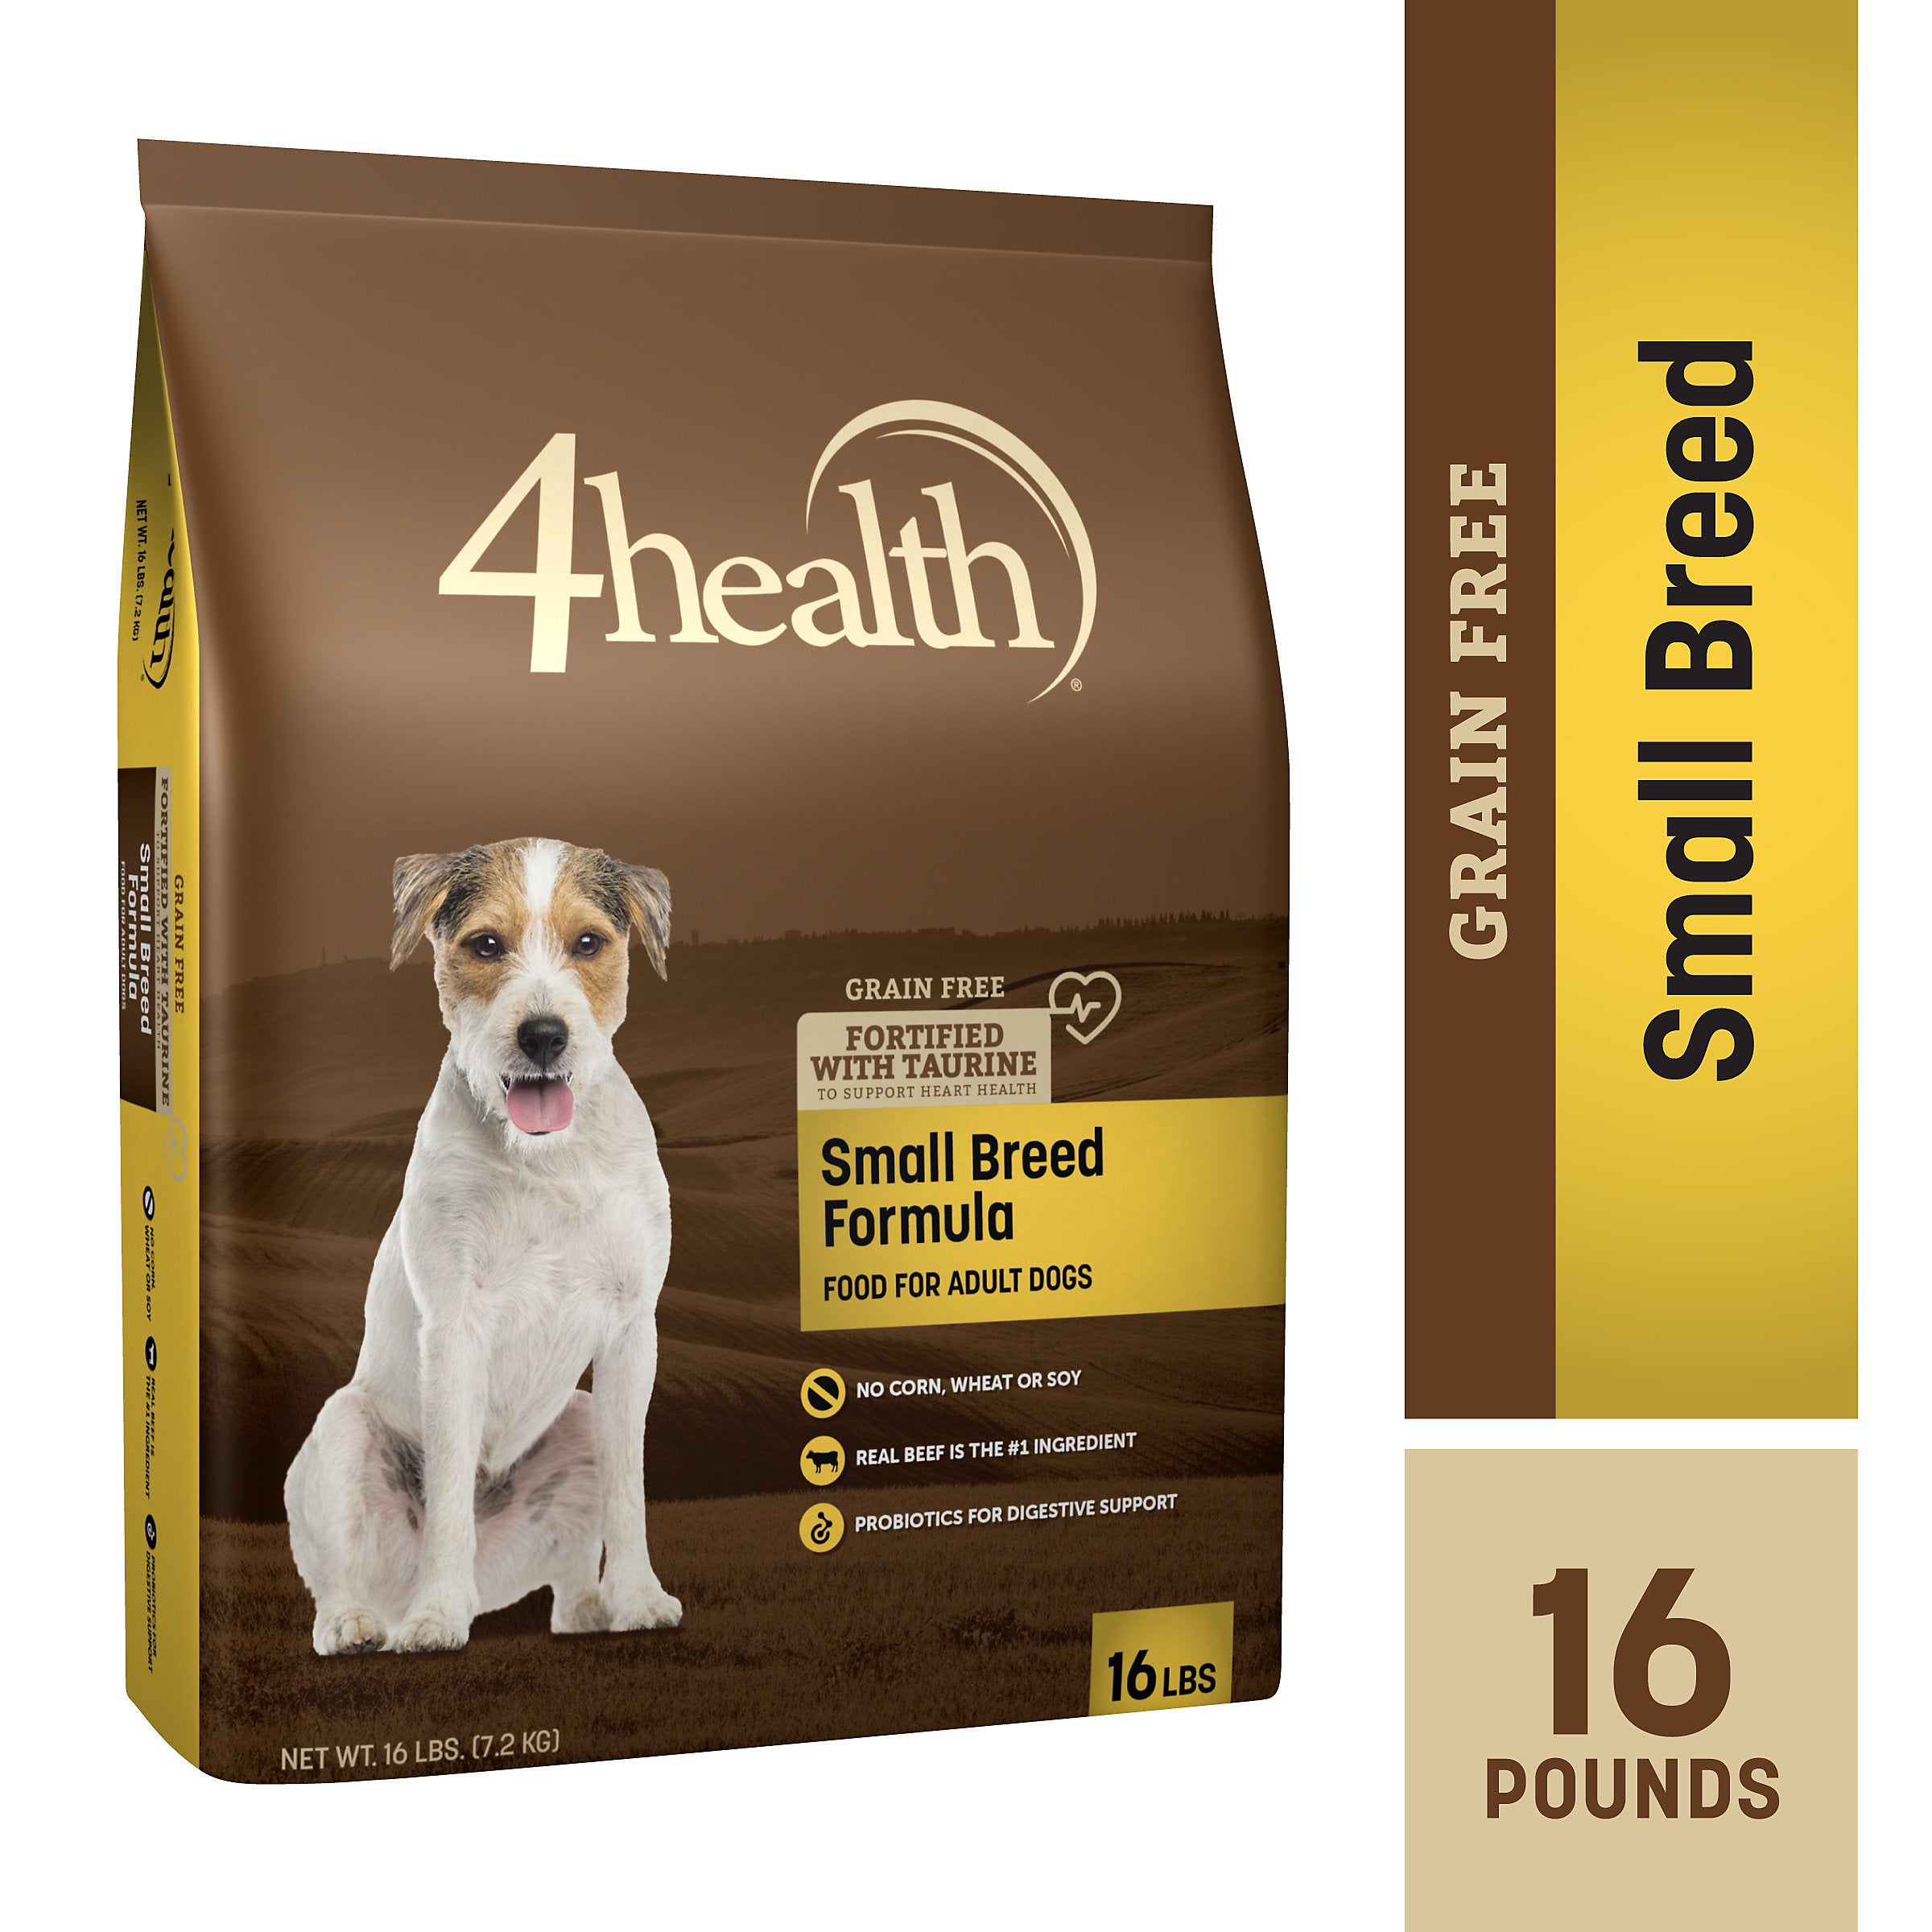 What Is The Difference Between Small Breed Dog Food And Regular